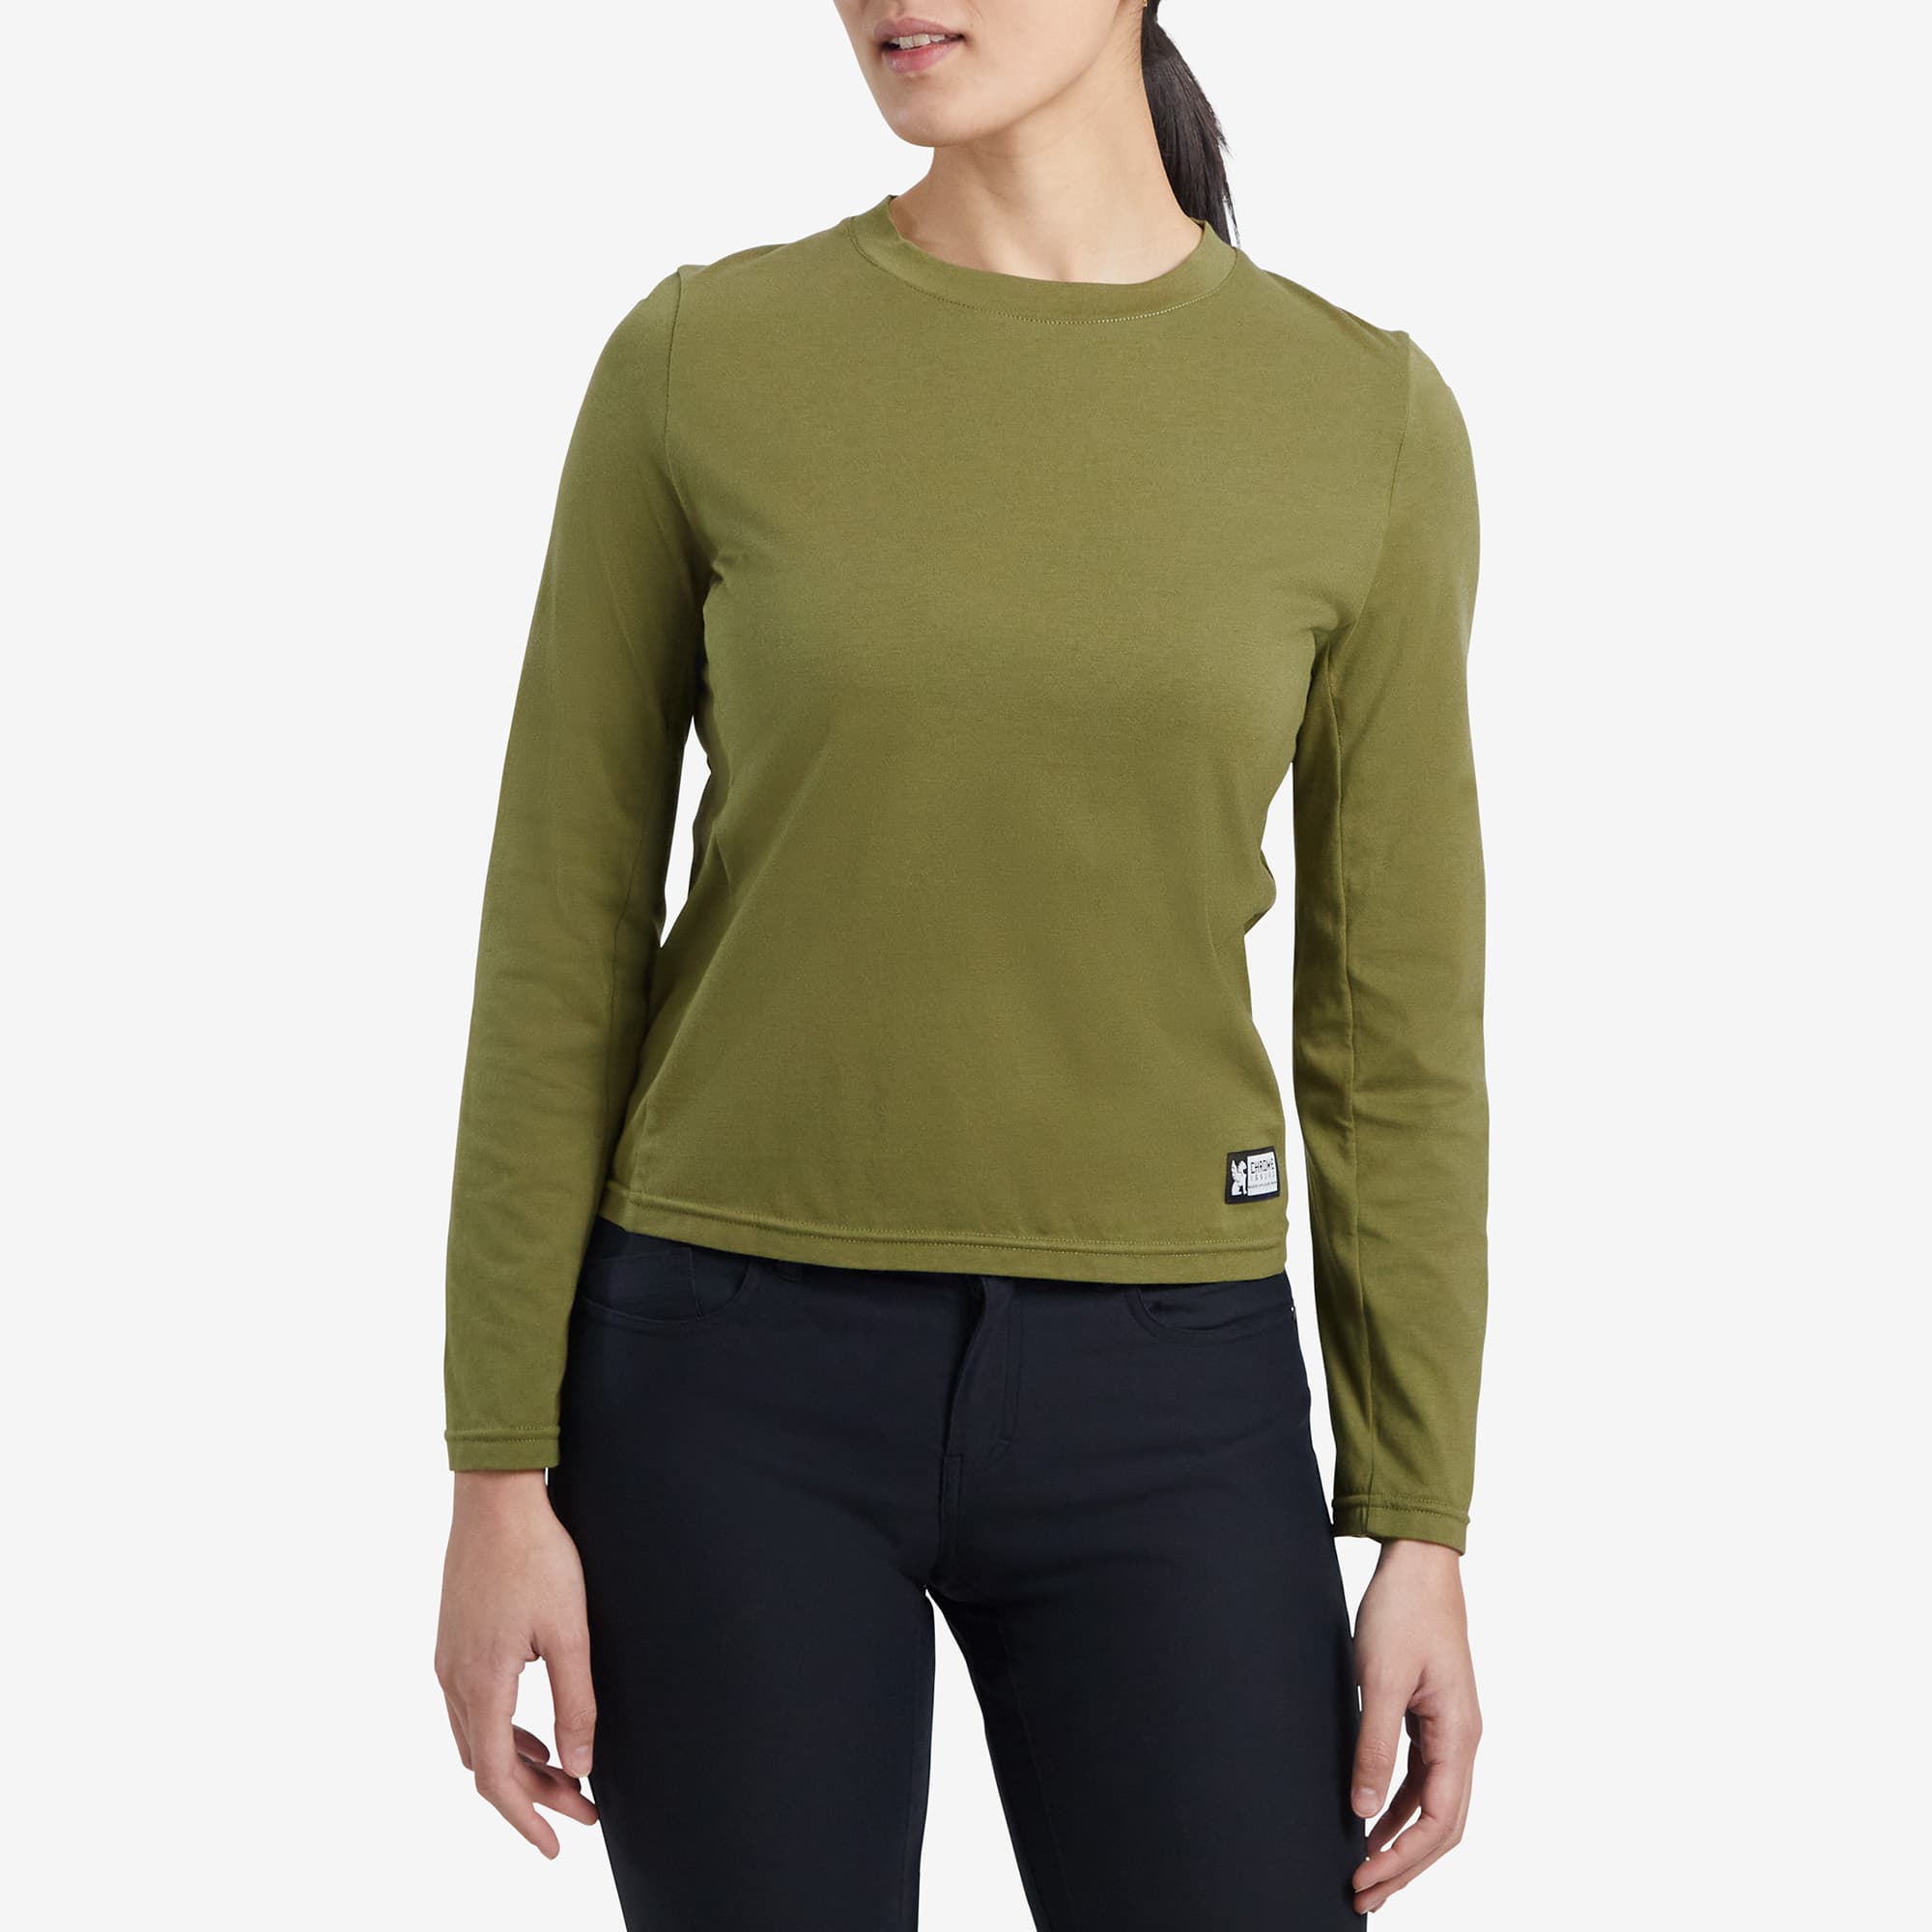 Women's Chrome basics T-Shirt green long sleeve worn by a woman #color_olive branch